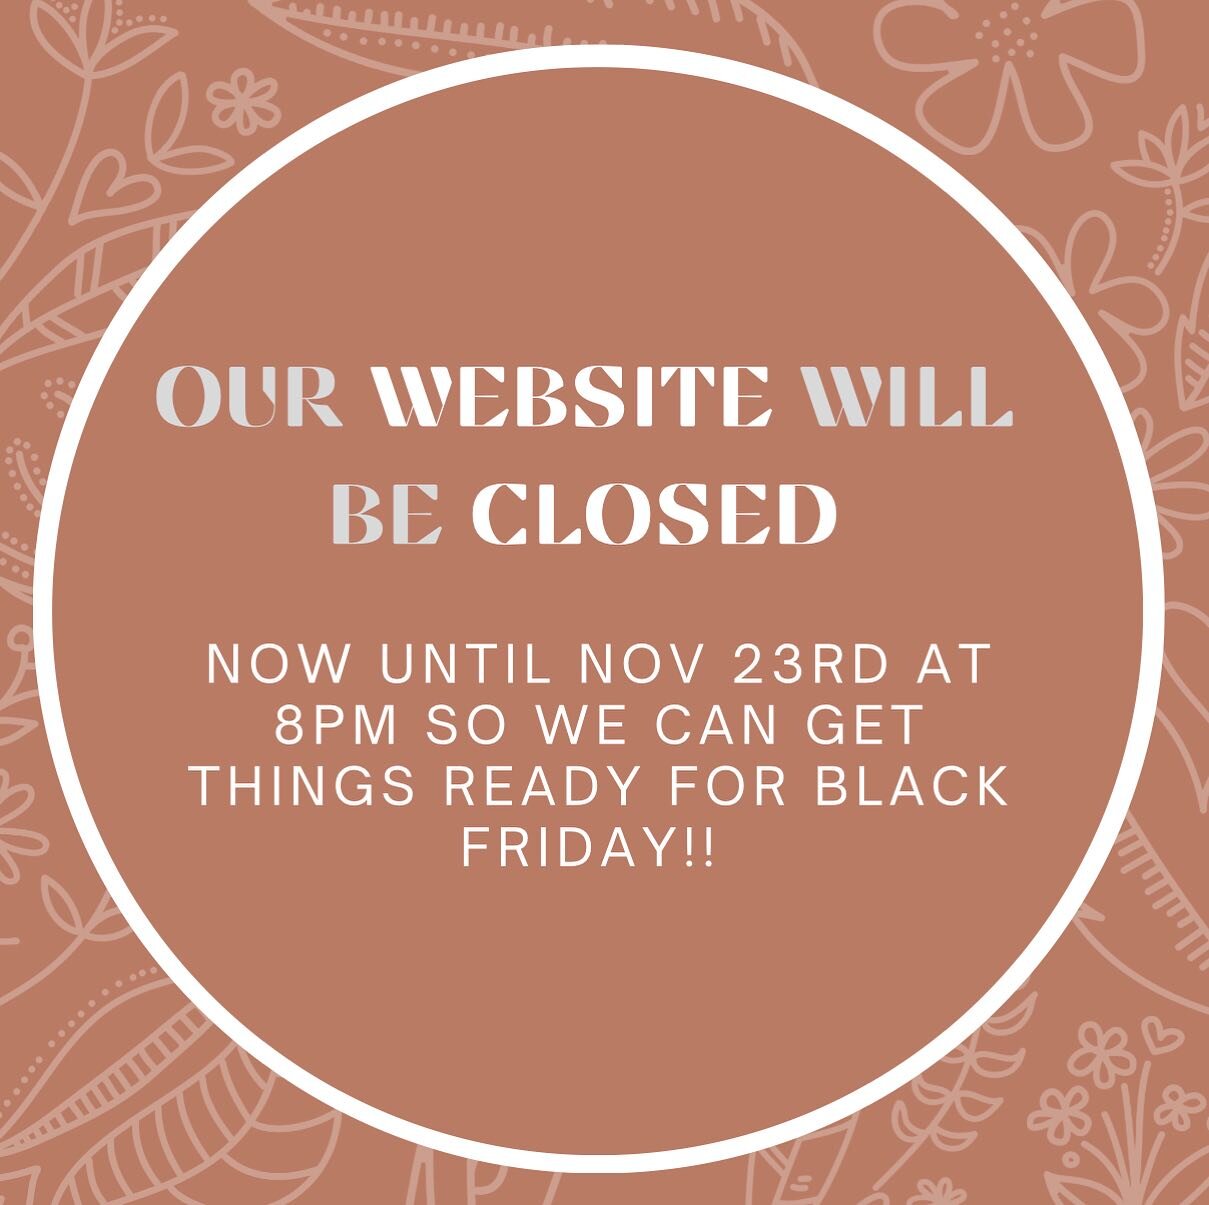 Our WEBSITE will be closed NOW until November 23rd at 8PM to get things ready for Black Friday!! 💕